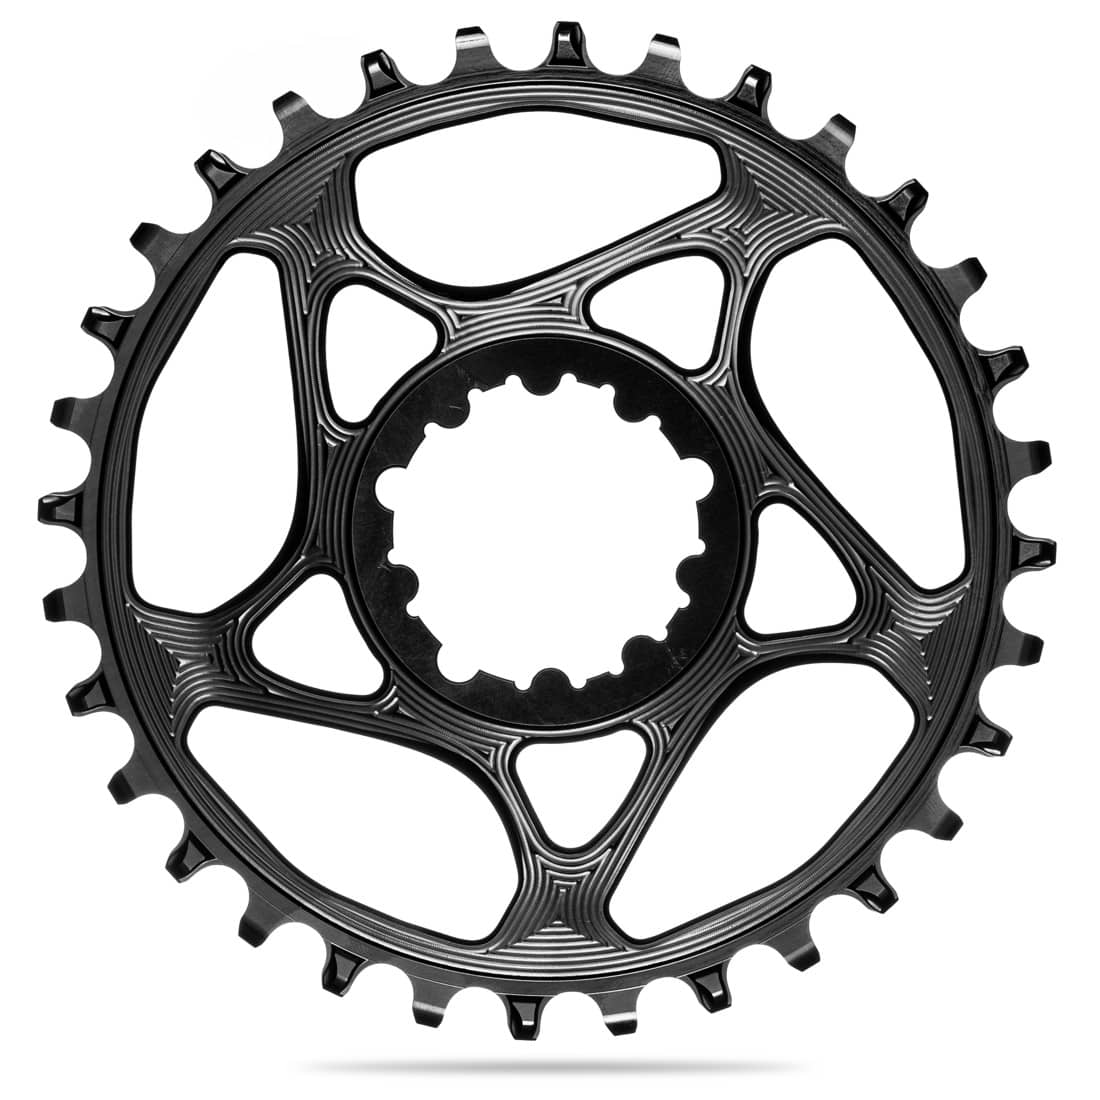 absoluteblack narrow wide direct mount chainring for Sram